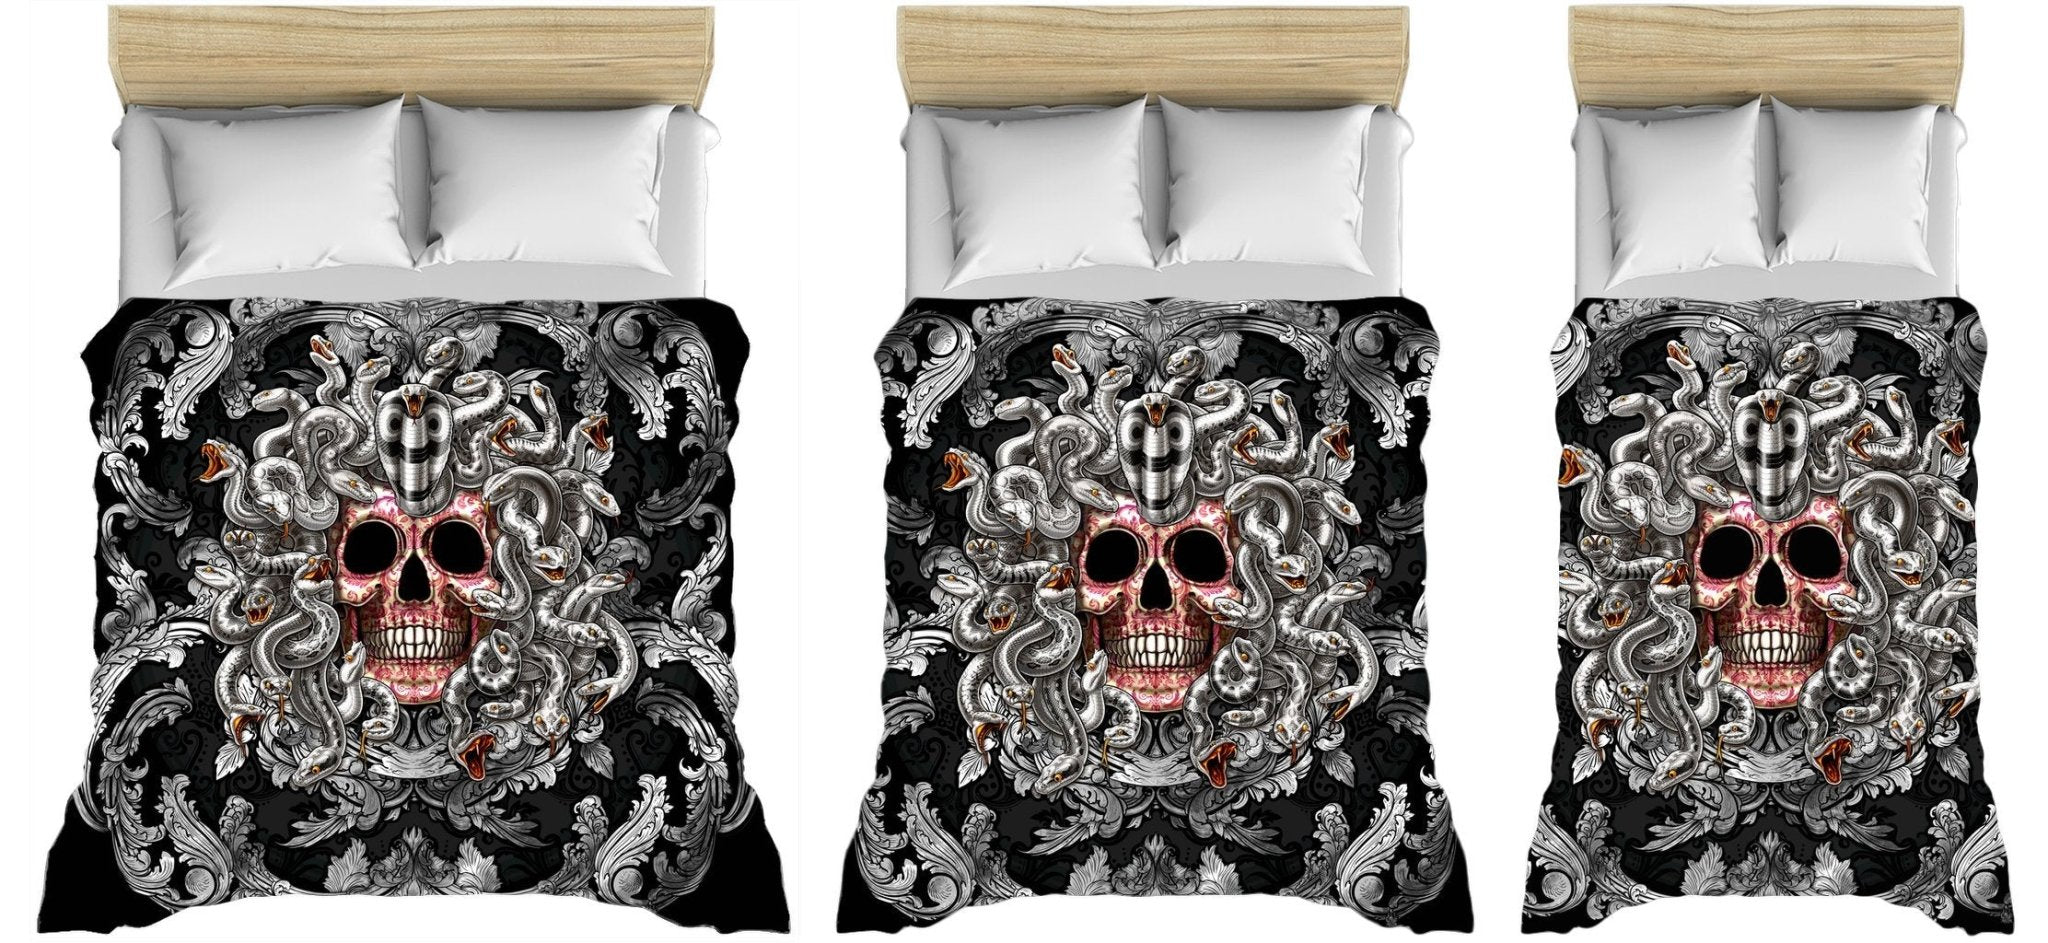 Skull Bedding Set, Comforter and Duvet, Victorian Goth Bed Cover and Bedroom Decor, King, Queen and Twin Size - Silver Medusa - Abysm Internal